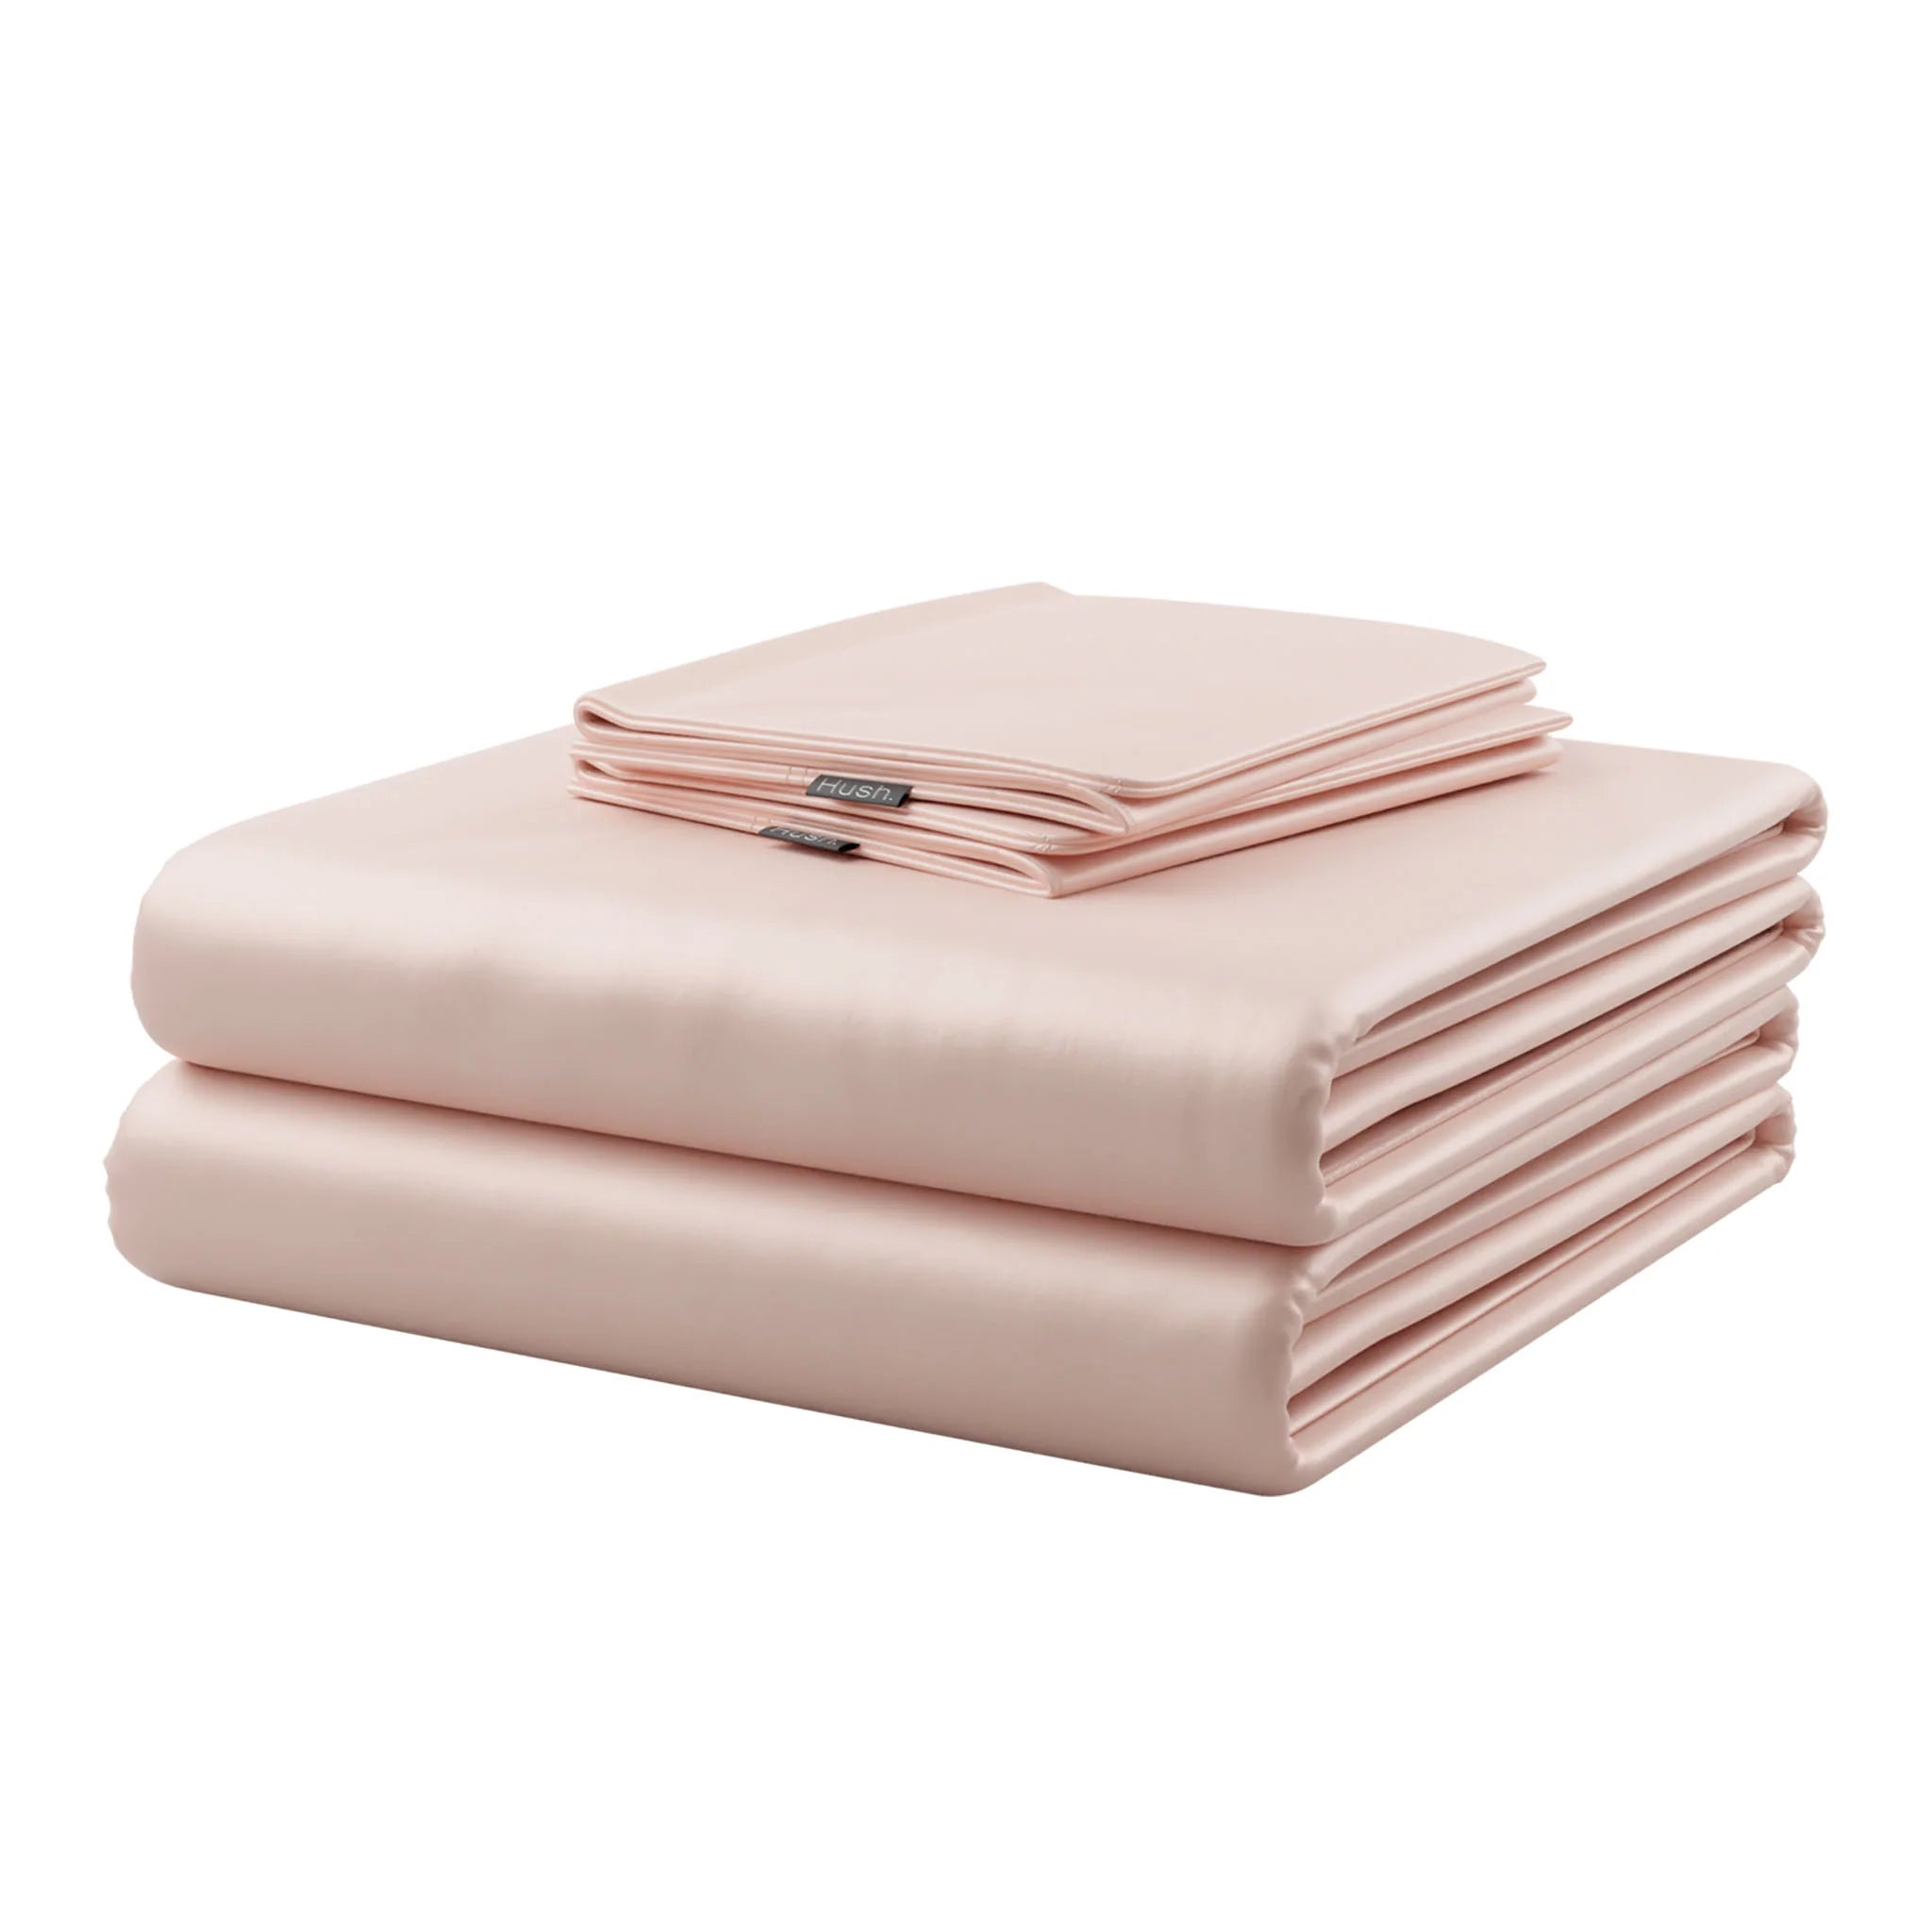 Hush Blankets Bedding Package Blush / Full Hush Iced 2.0 Cooling Organic Bamboo Bed Sheet and Pillowcase Bedding Package - Available in 8 Colours and 5 Sizes